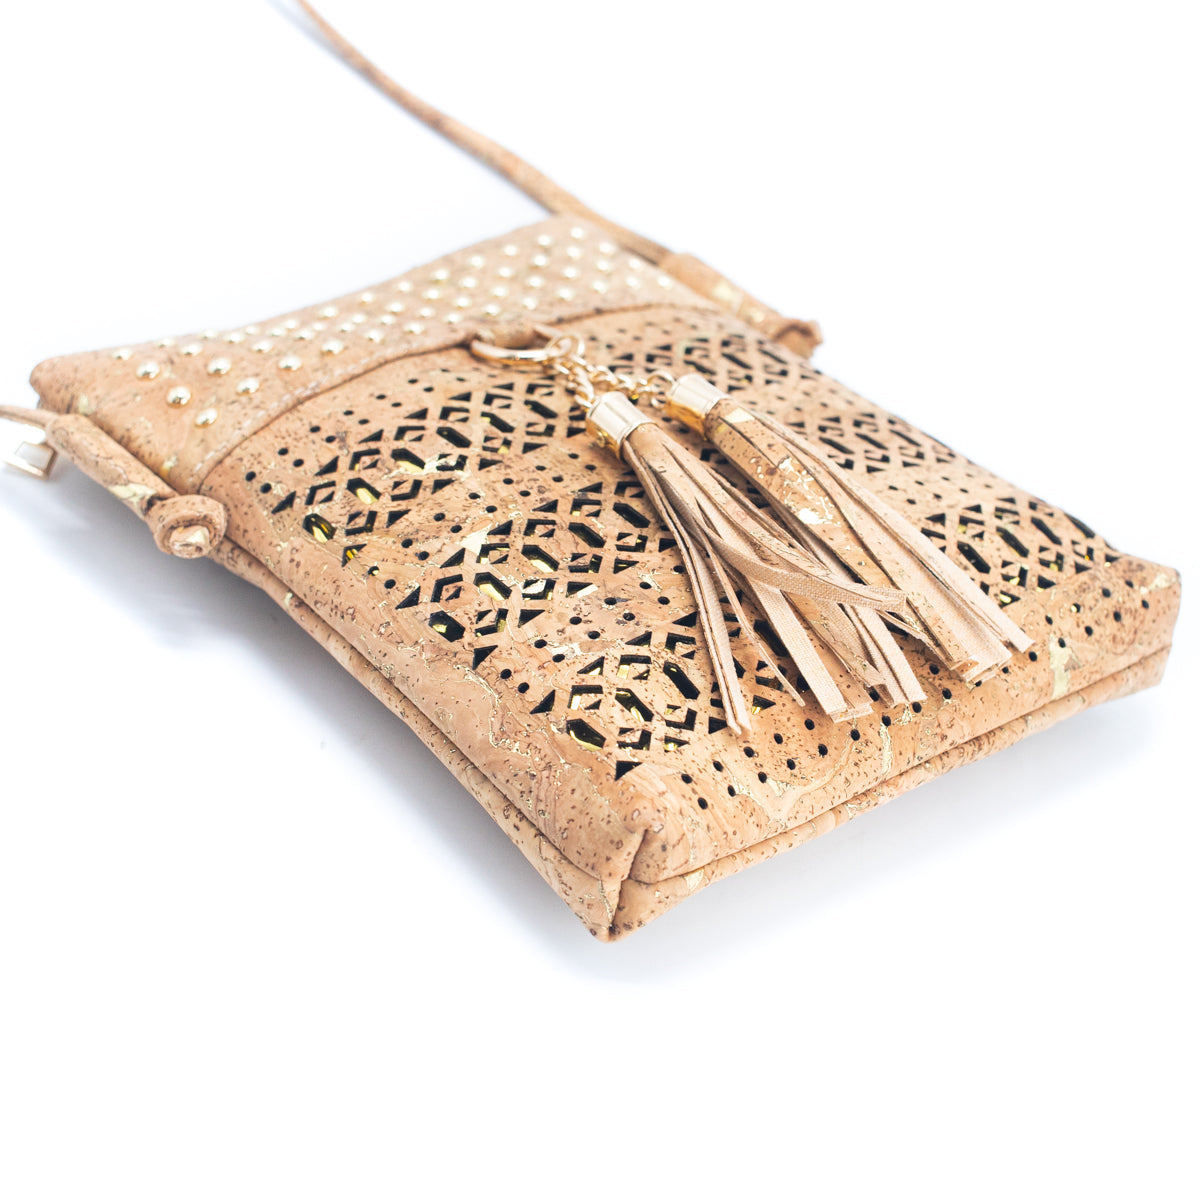 Gold & Silver Accented Cork Women's Cut-out Crossbody Bag w/ Fringe Zipper | THE CORK COLLECTION